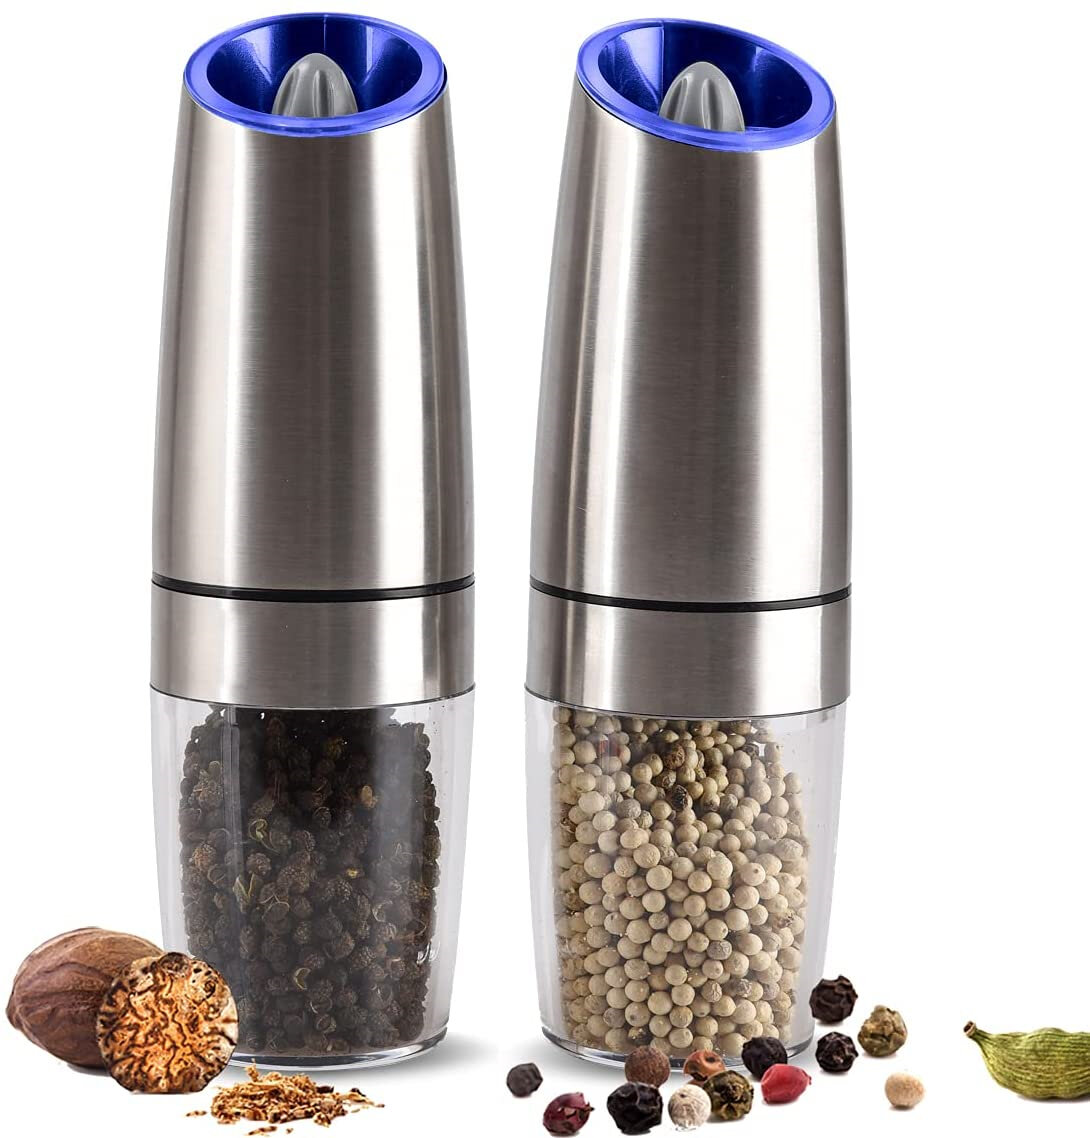 Salt Mill Grinder Battery Powered black silver Gravity Electric Salt and Pepper Grinder,Pepper Mill and Salt Mill with Adjustable Ceramic Rotor silver Automatic Operation 